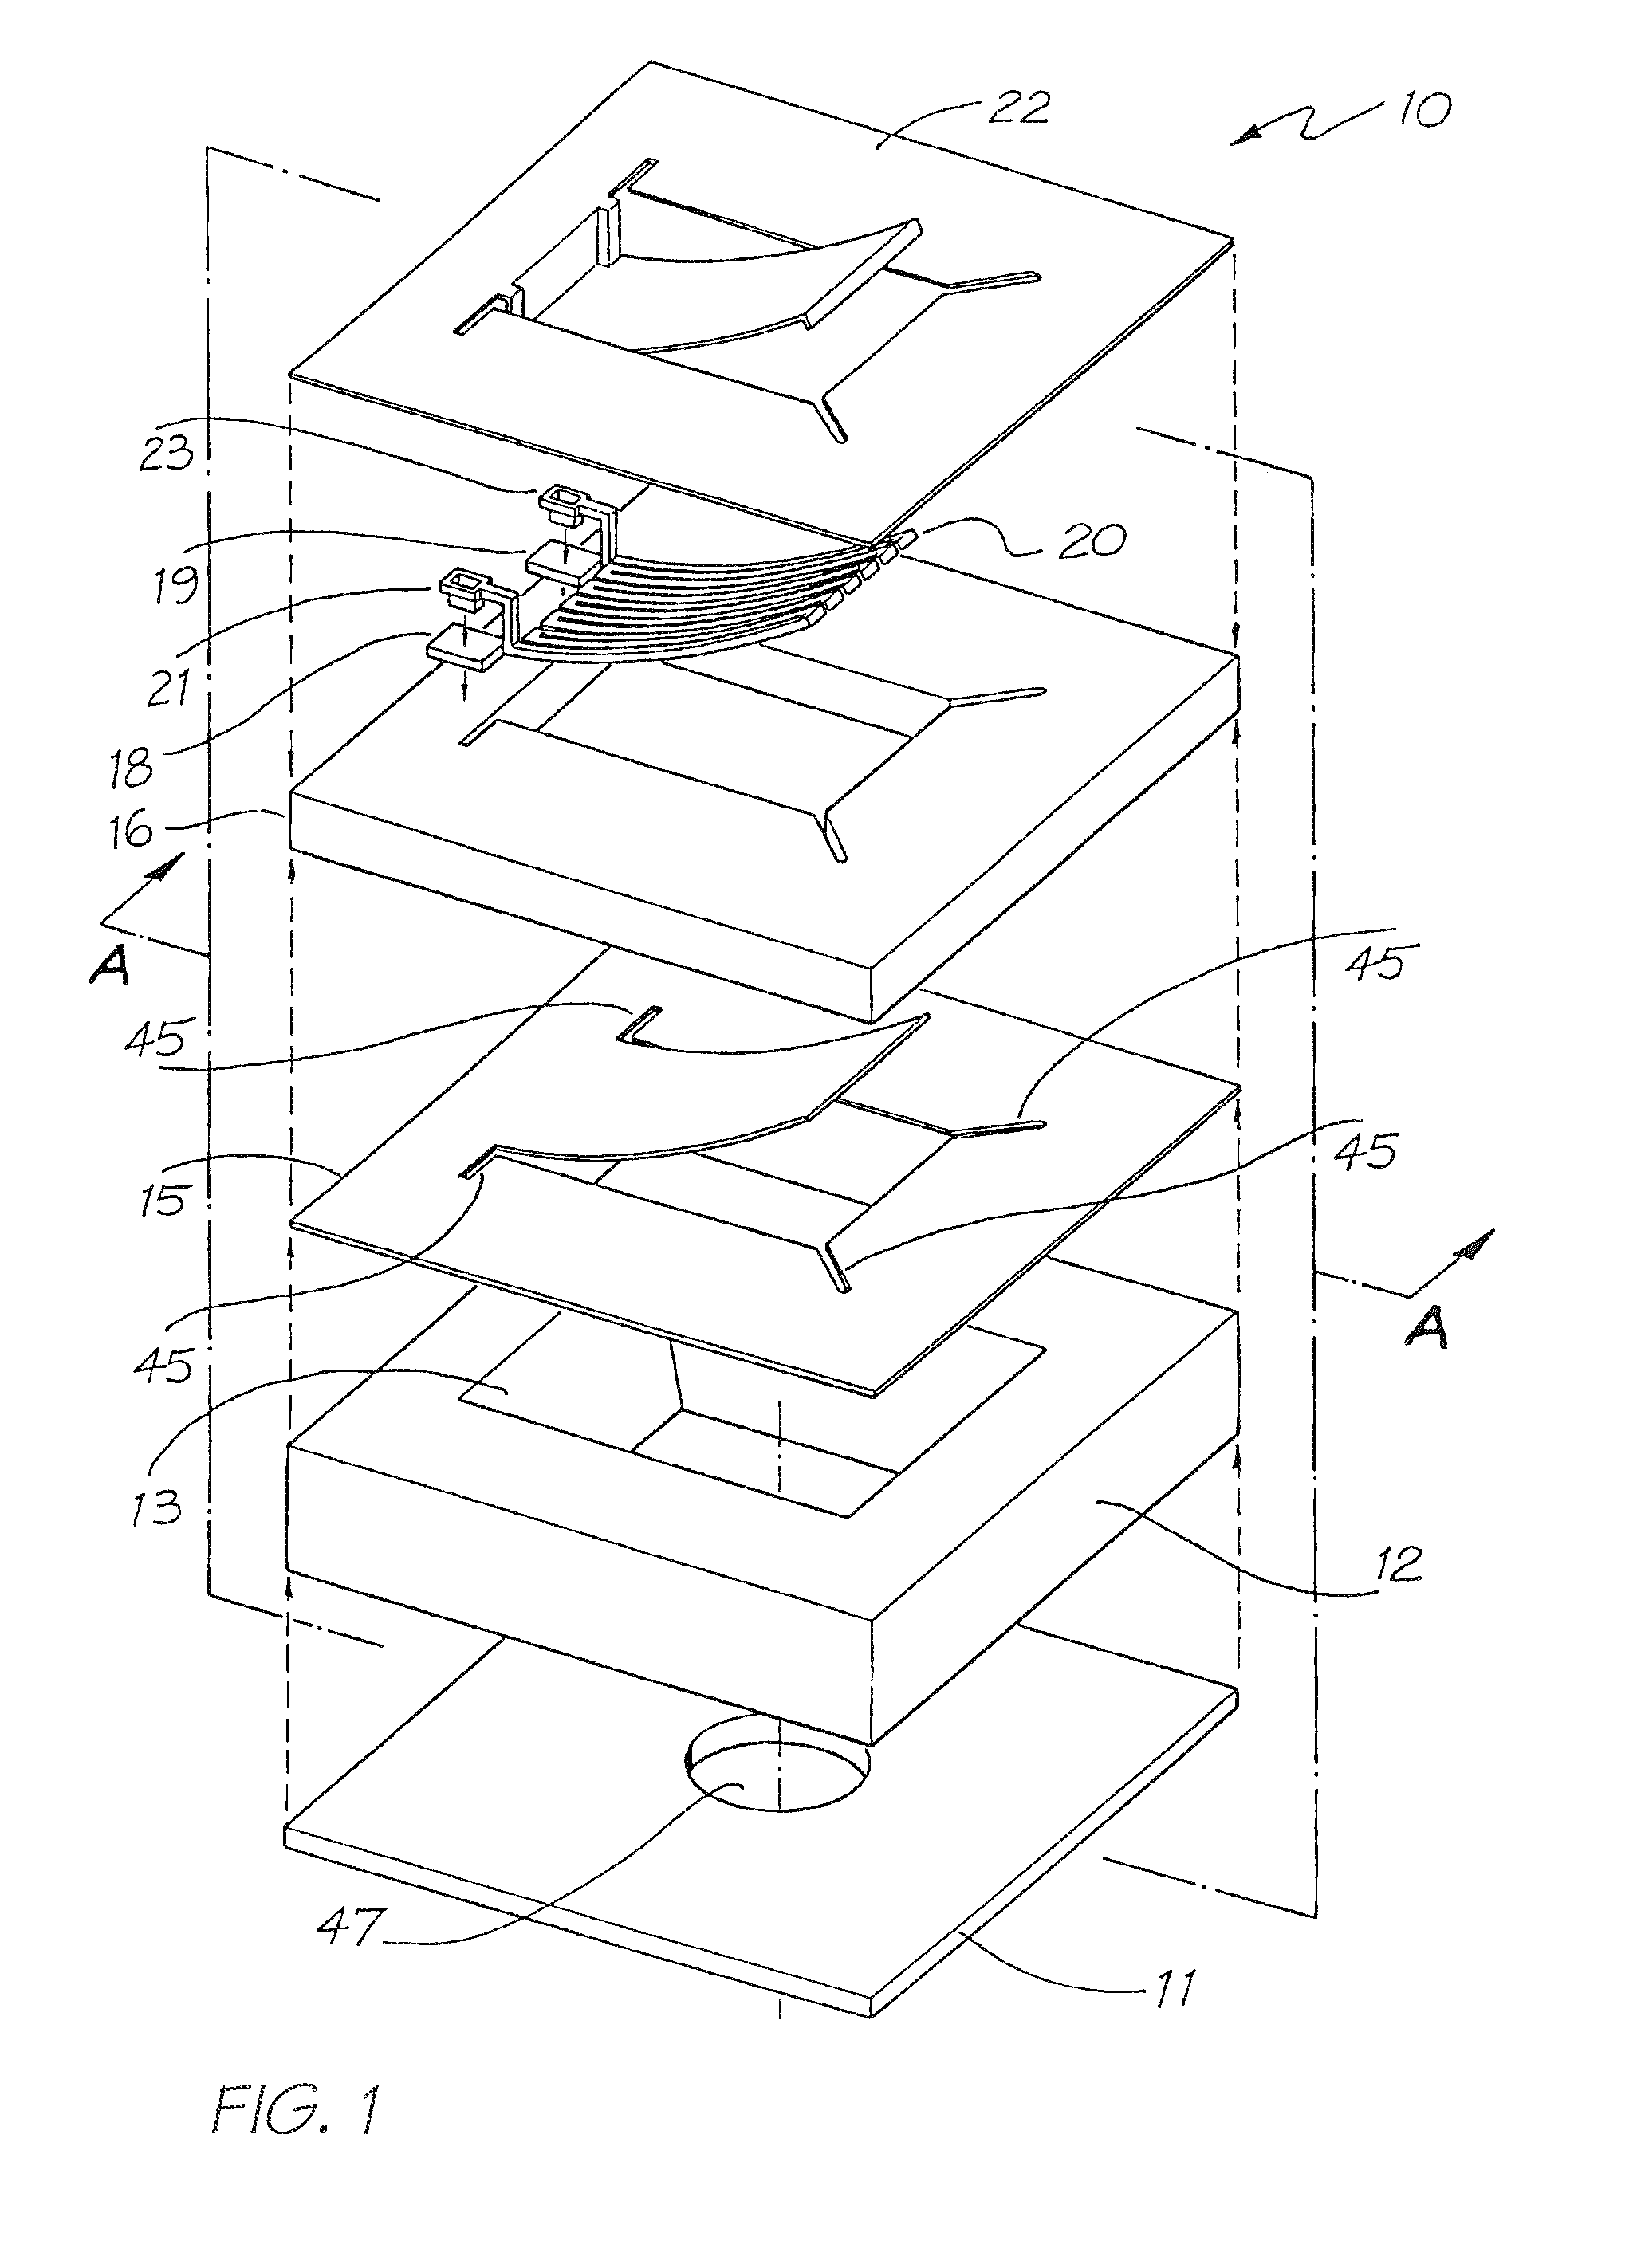 Printhead Integrated Circuit With Ink Supply Through Wafer Thickness